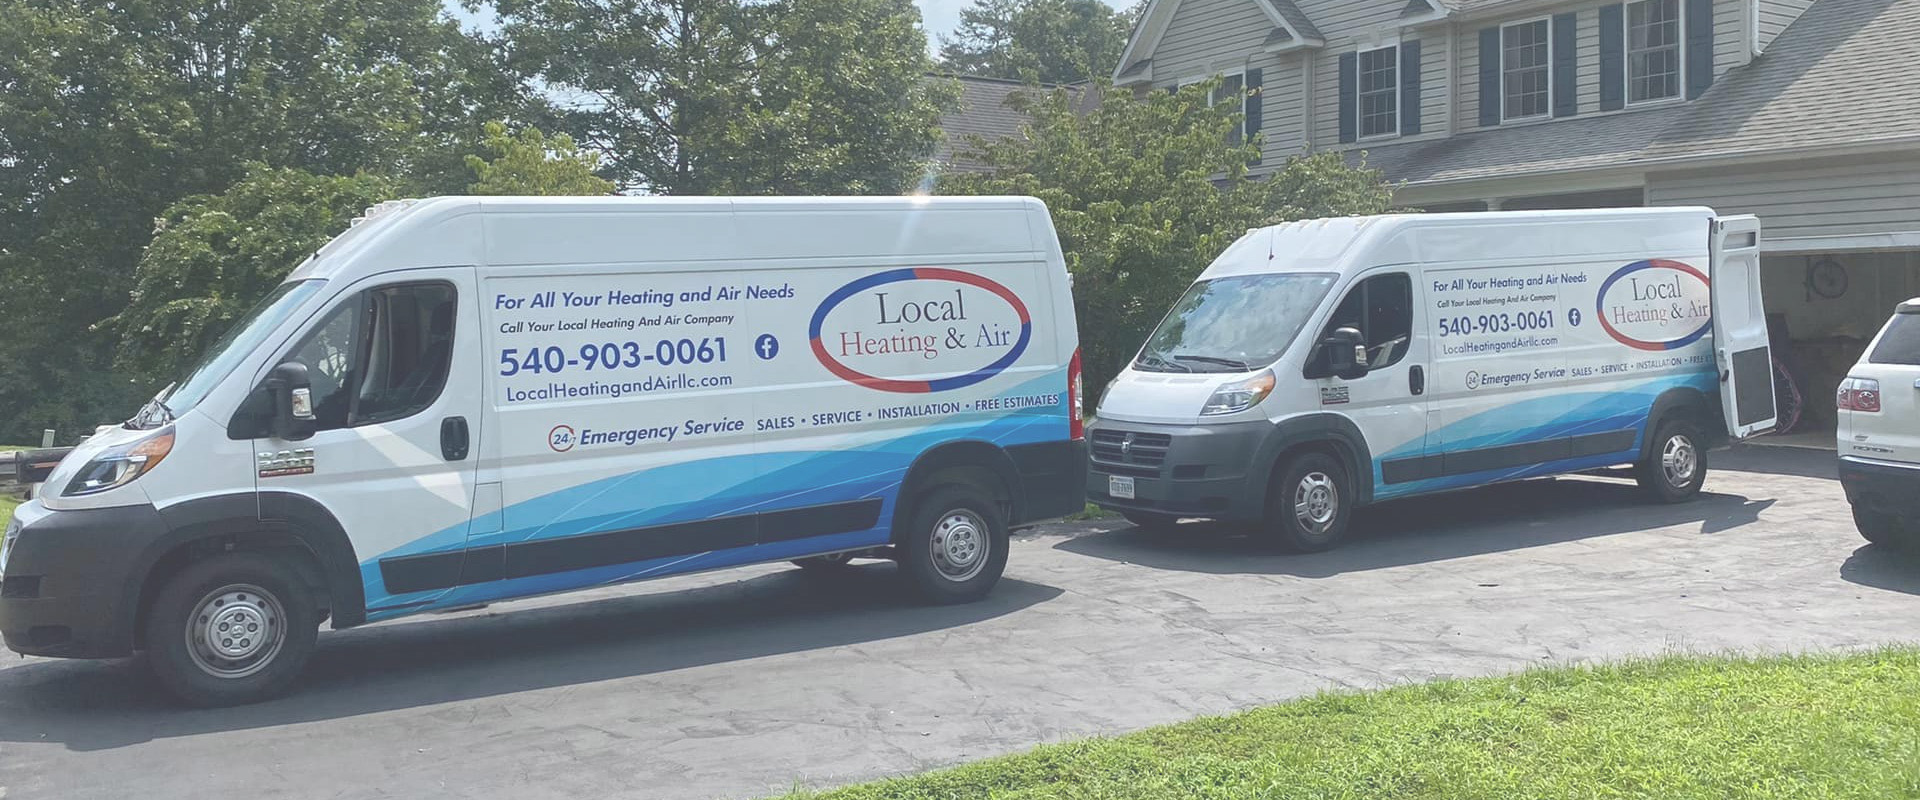 Local Heating & Air - Our Service Vans